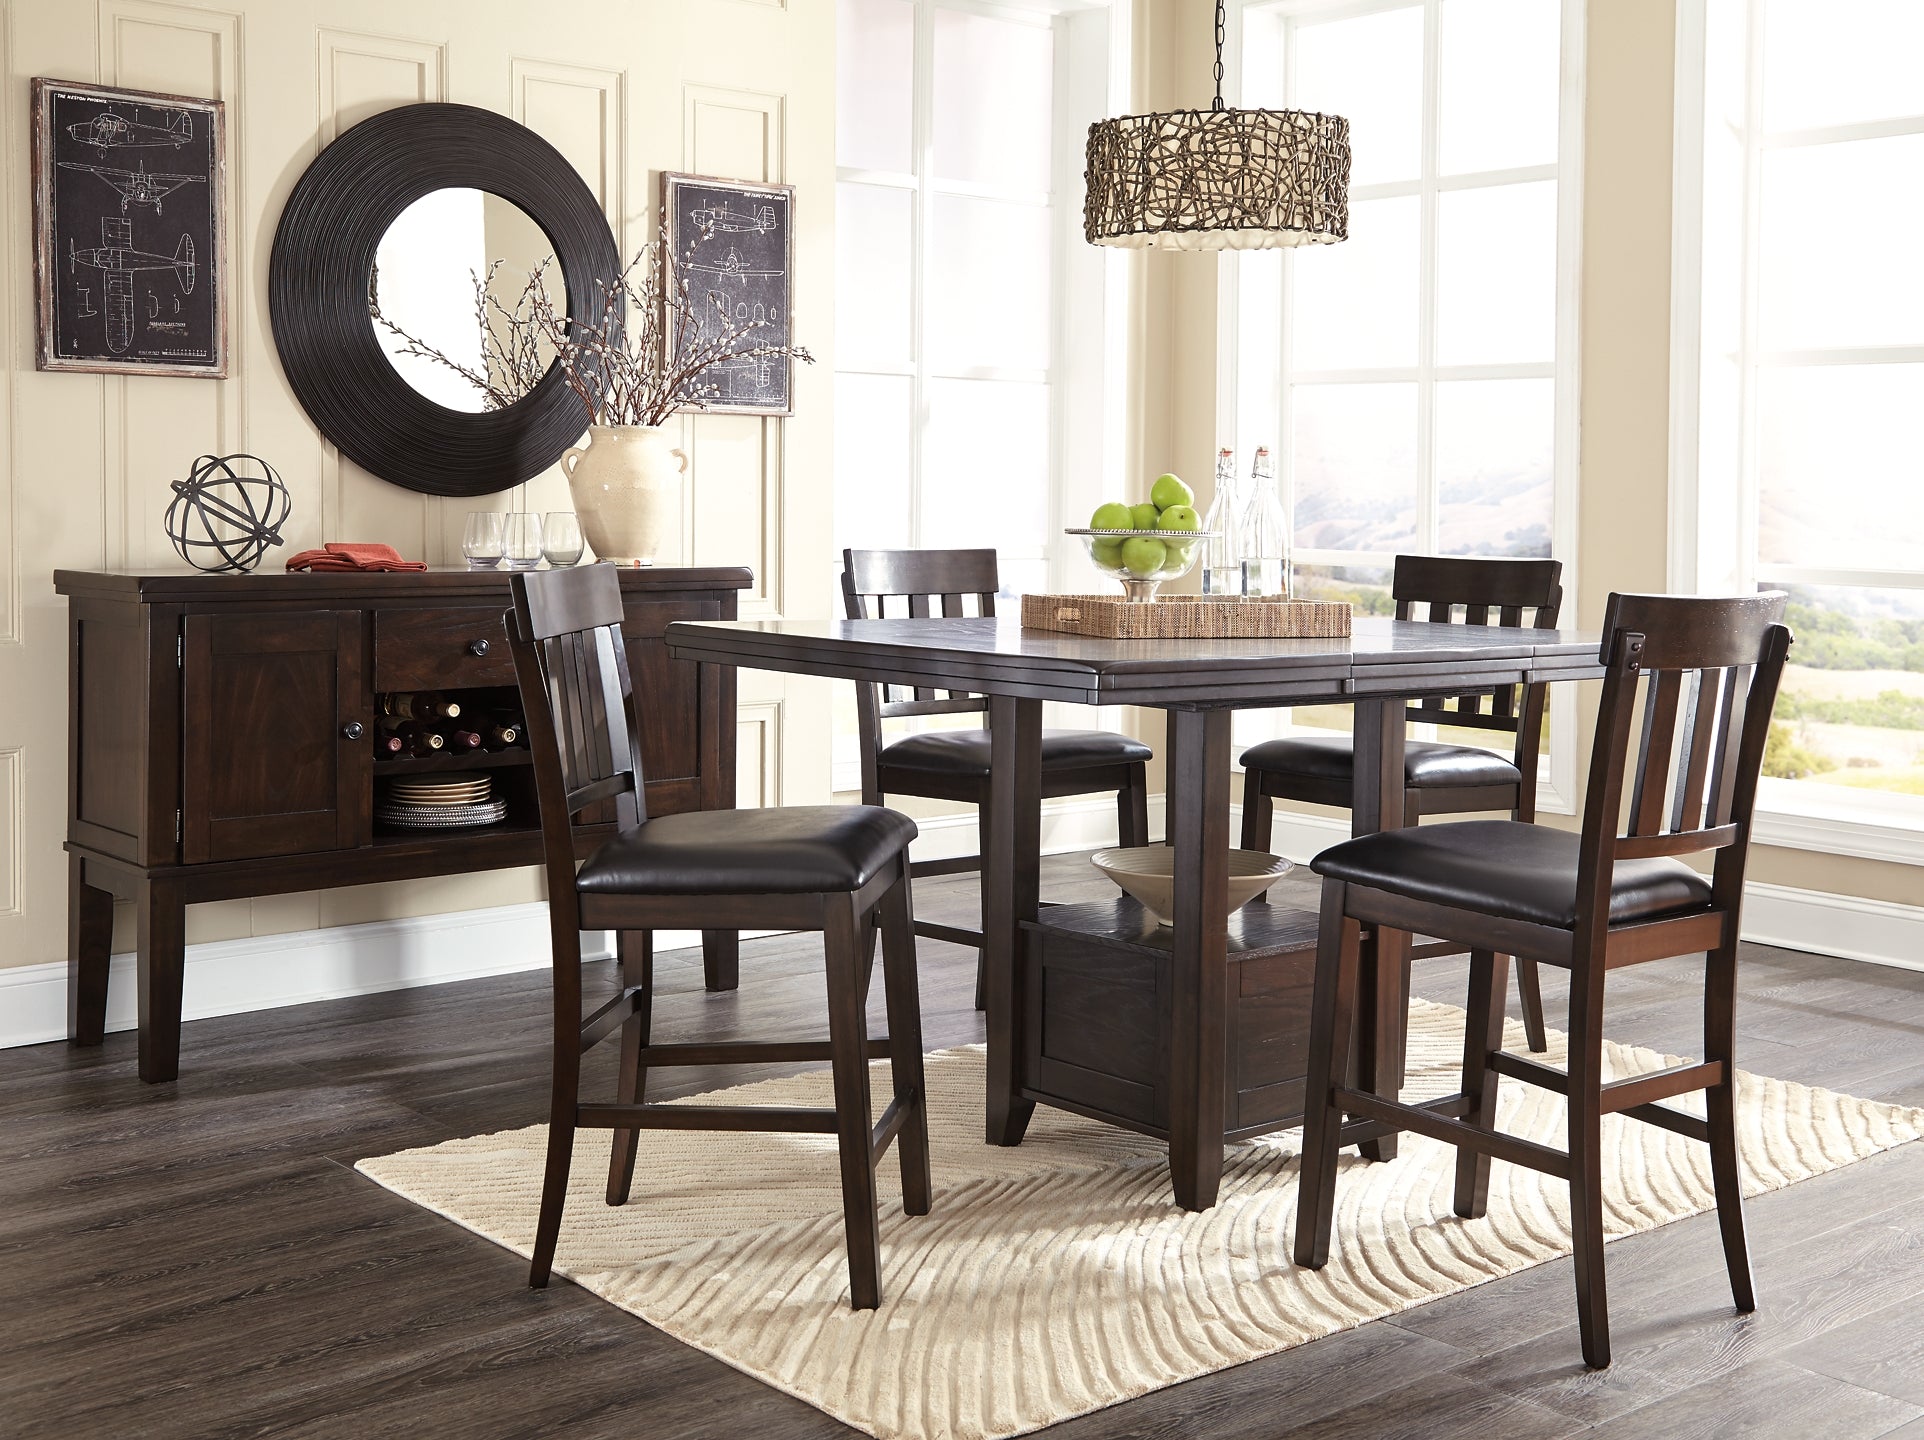 Haddigan Counter Height Dining Table and 4 Barstools with Storage Wilson Furniture (OH)  in Bridgeport, Ohio. Serving Bridgeport, Yorkville, Bellaire, & Avondale